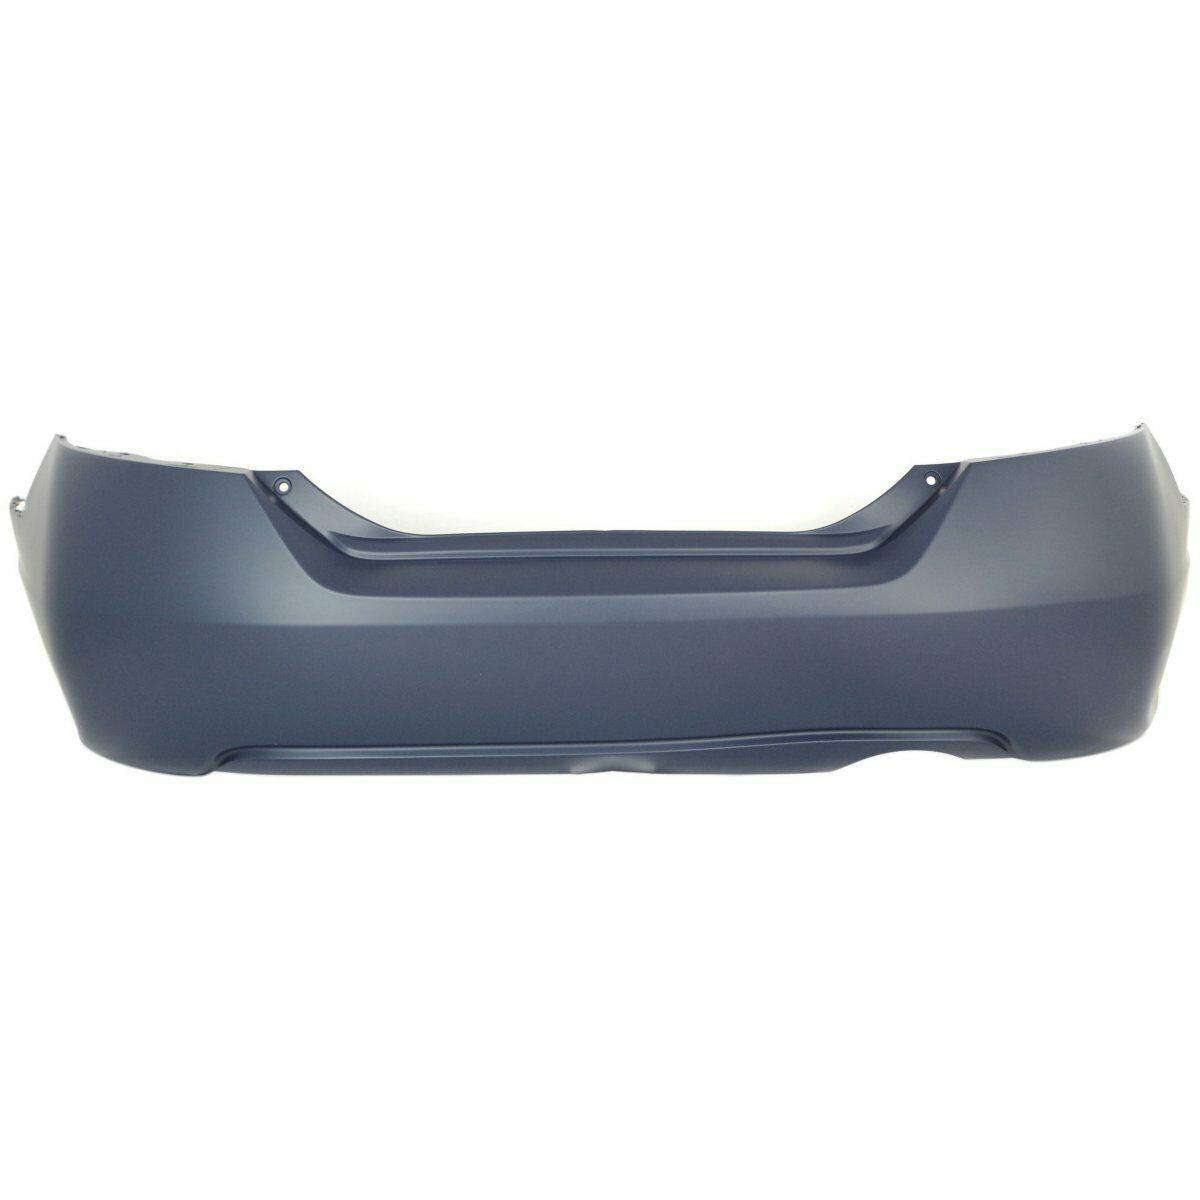 2006-2011 Honda Civic Coupe Rear bumper Painted to Match